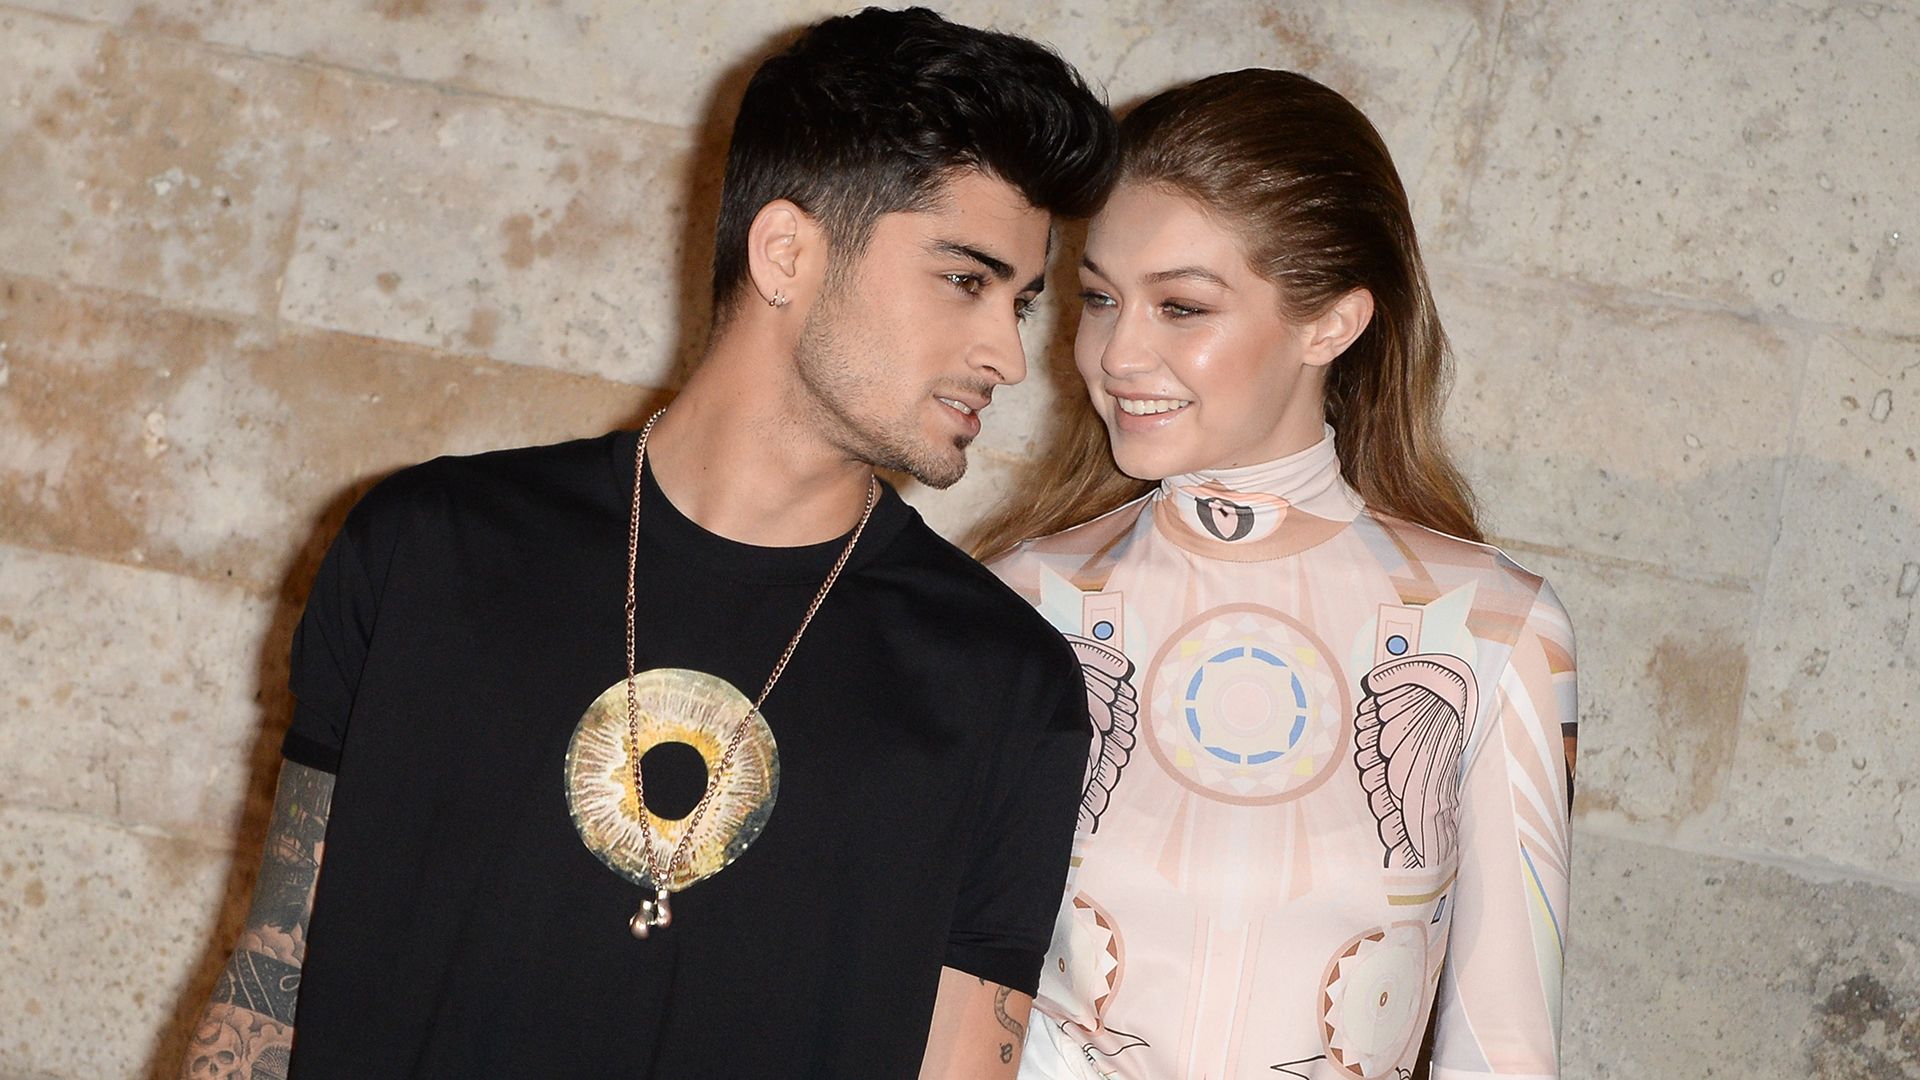 Are Gigi Hadid & Zayn Malik Back Together? All Signs Point to Yes